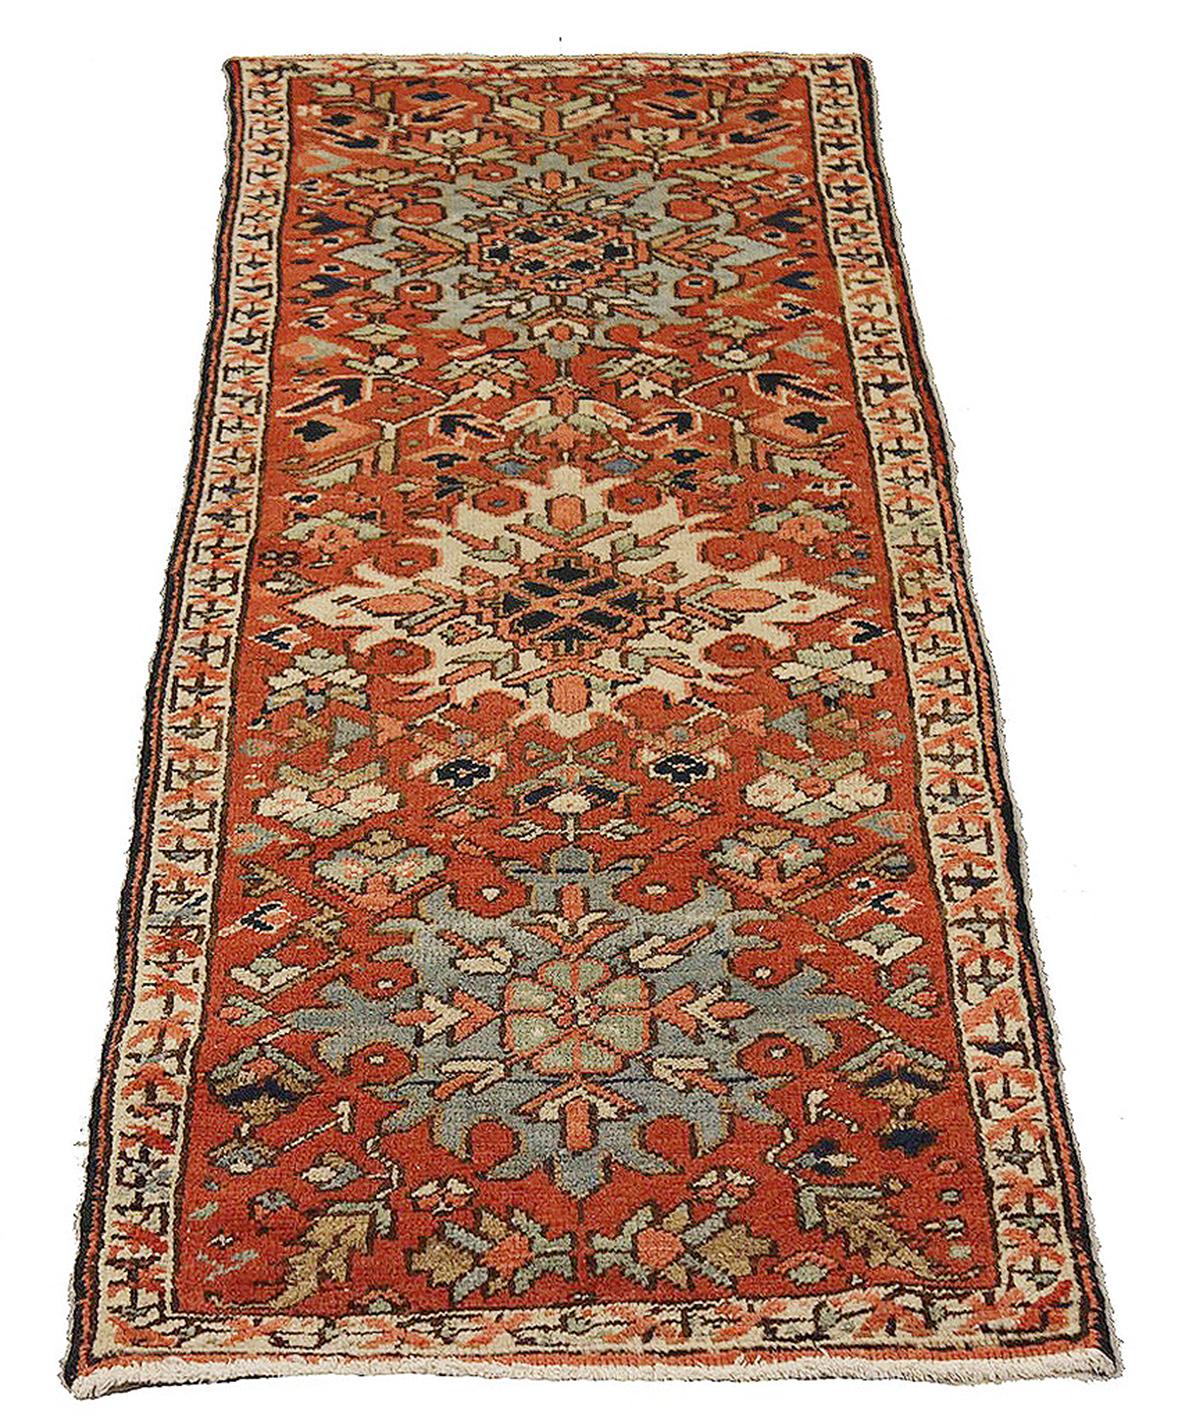 Antique Persian rug handwoven from the finest sheep’s wool and colored with all-natural vegetable dyes that are safe for humans and pets. It’s a traditional Heriz design featuring a lovely red and ivory field with colorful floral medallions. It’s a